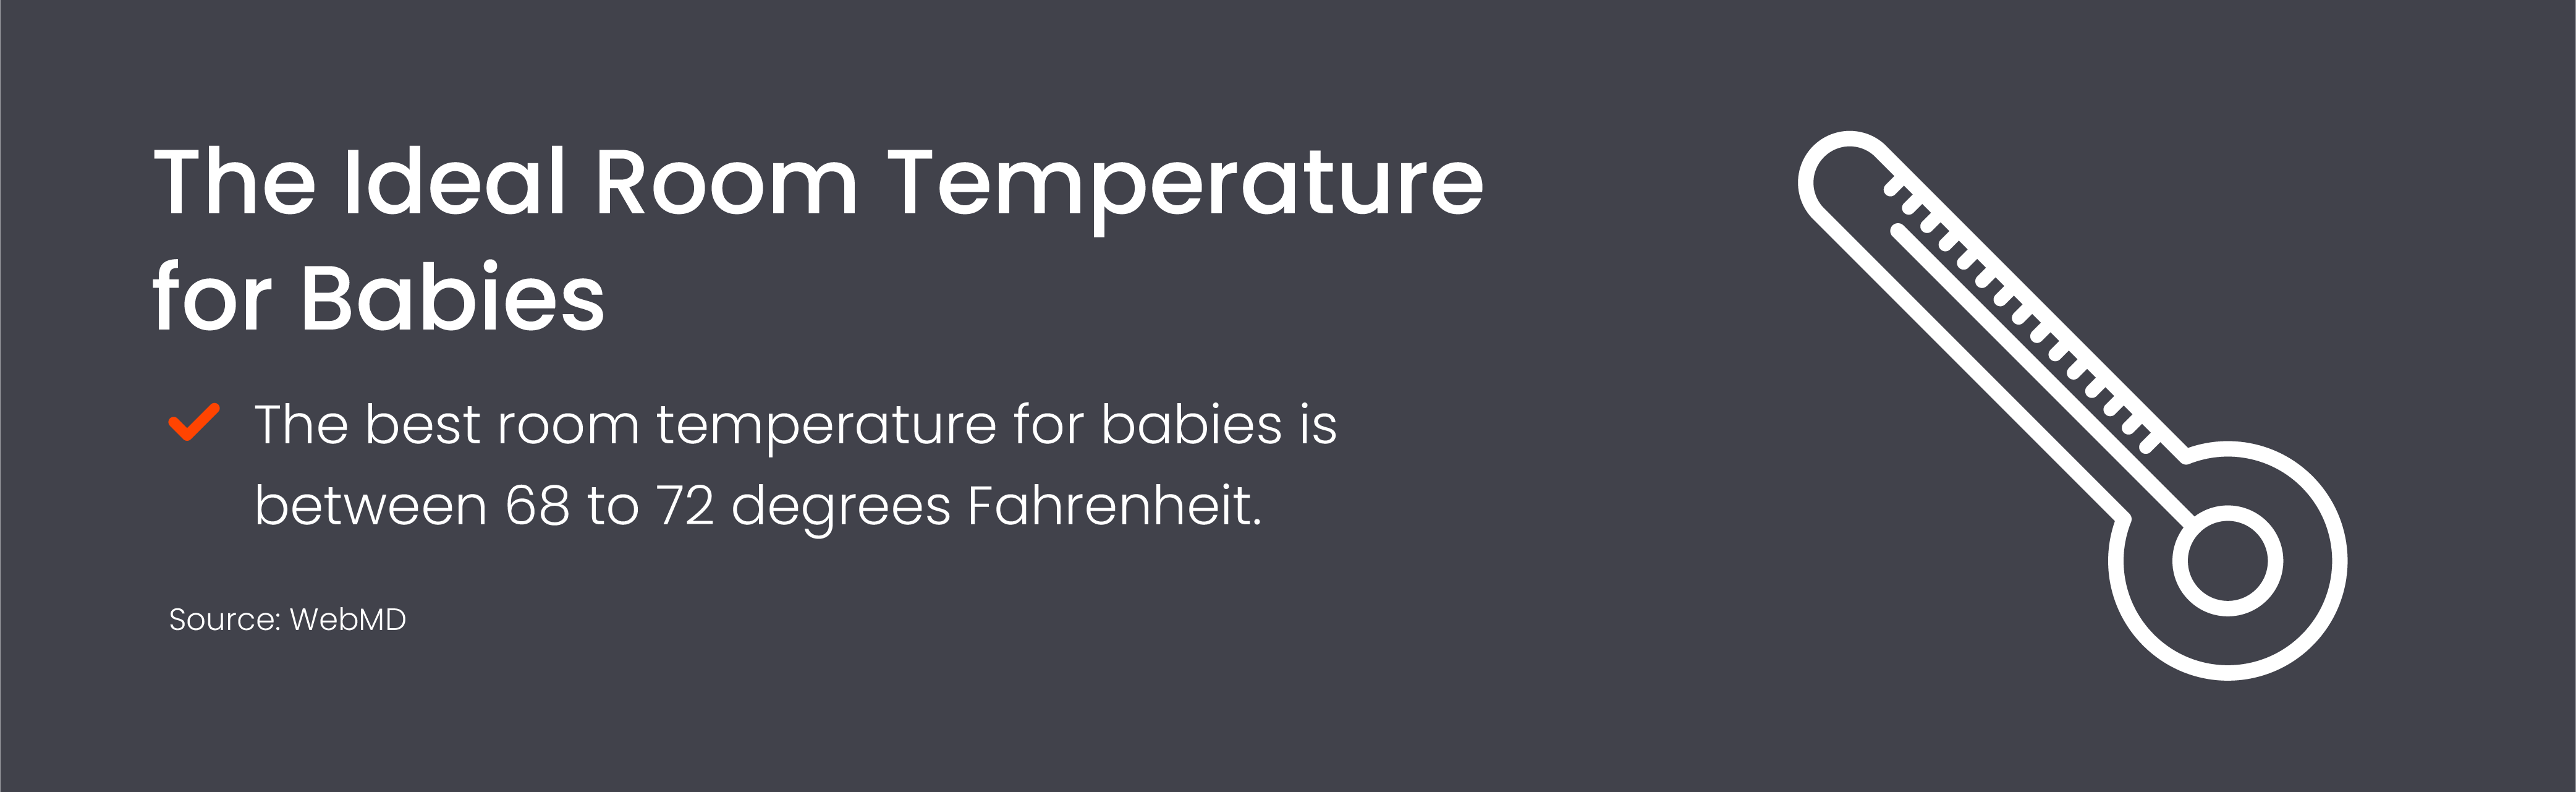 The ideal room temperature for babies is between 68 and 72 degrees Fahrenheit